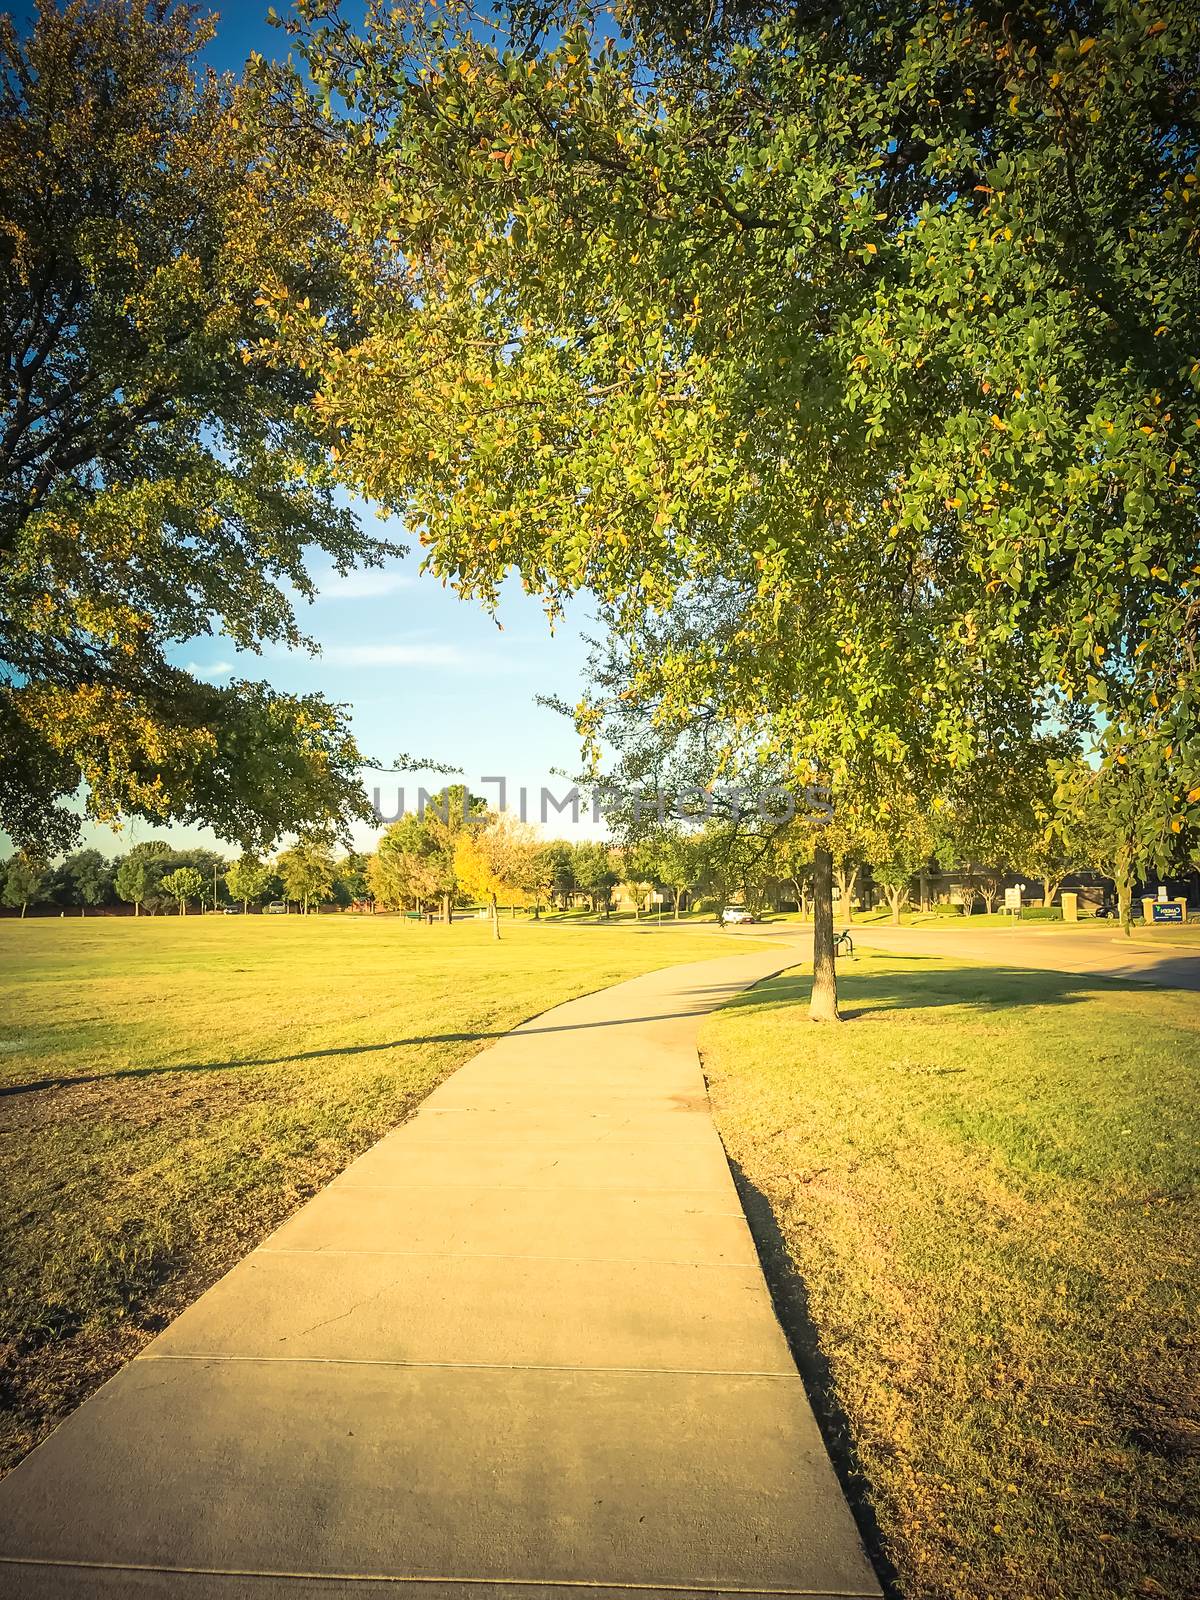 Vintage tone image of empty curved pathway in city park suburbs of Dallas, Texas, USA